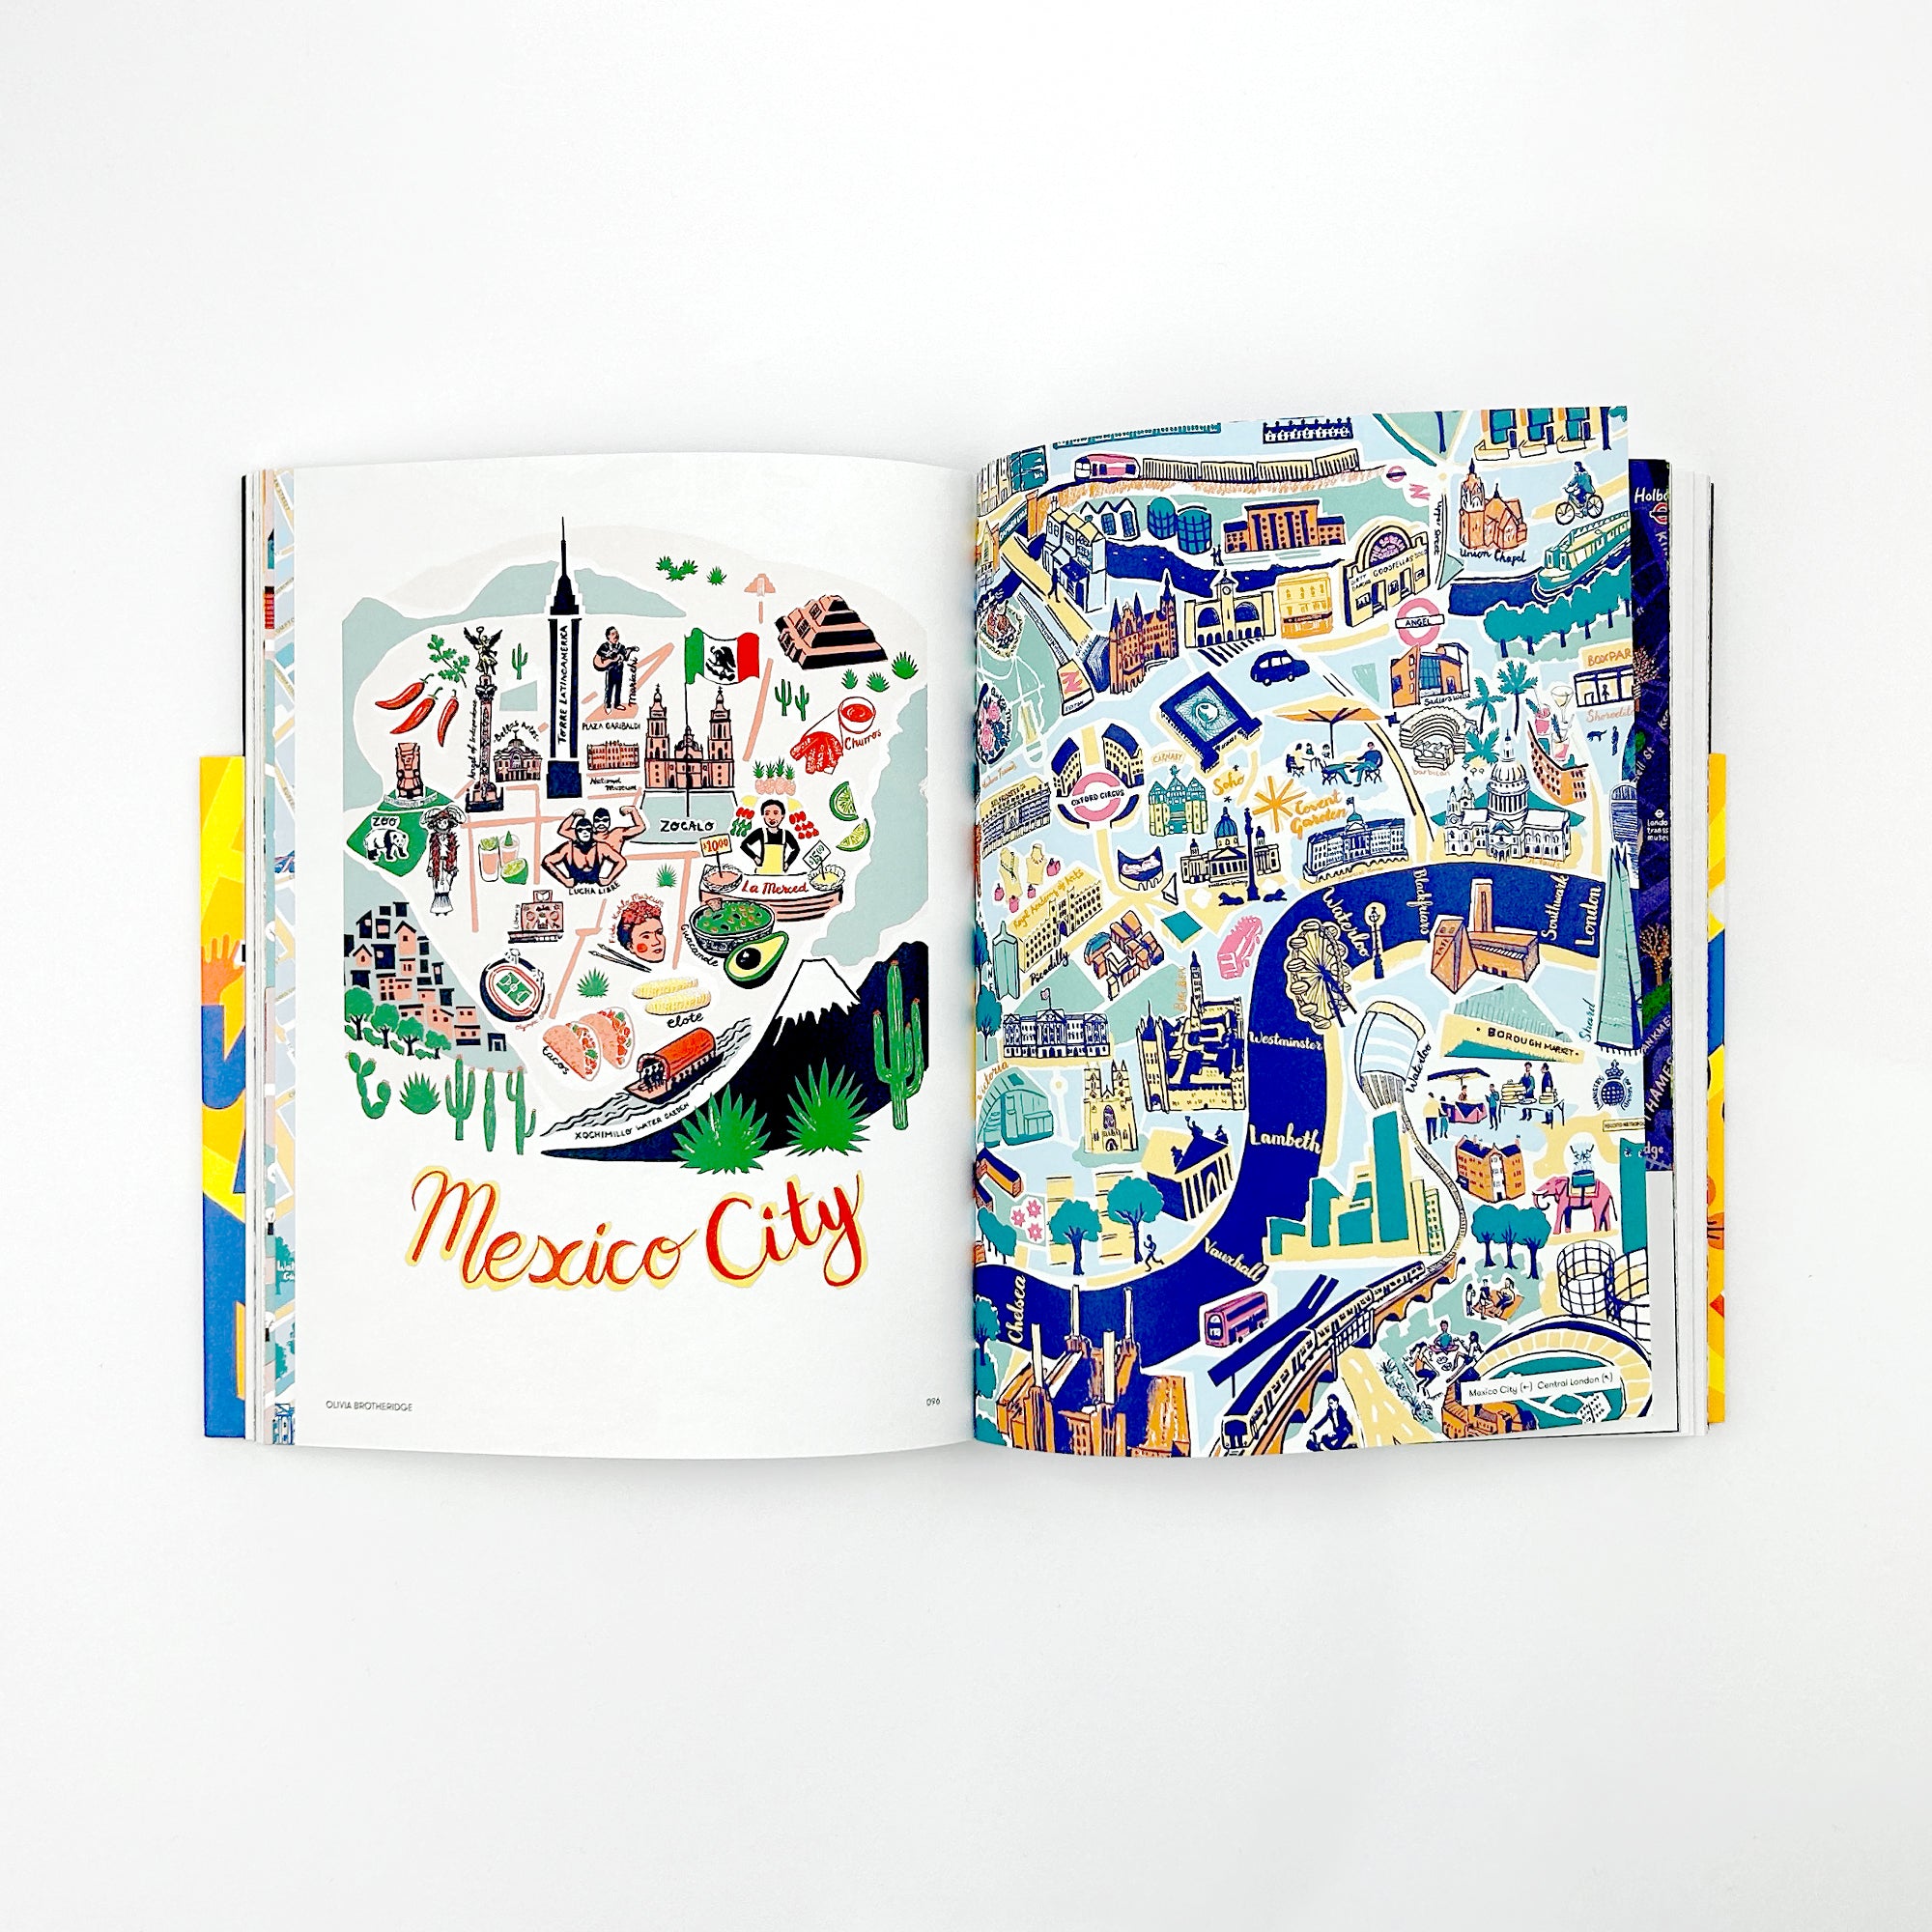 GET LOST!: Explore the World in Map Illustrations